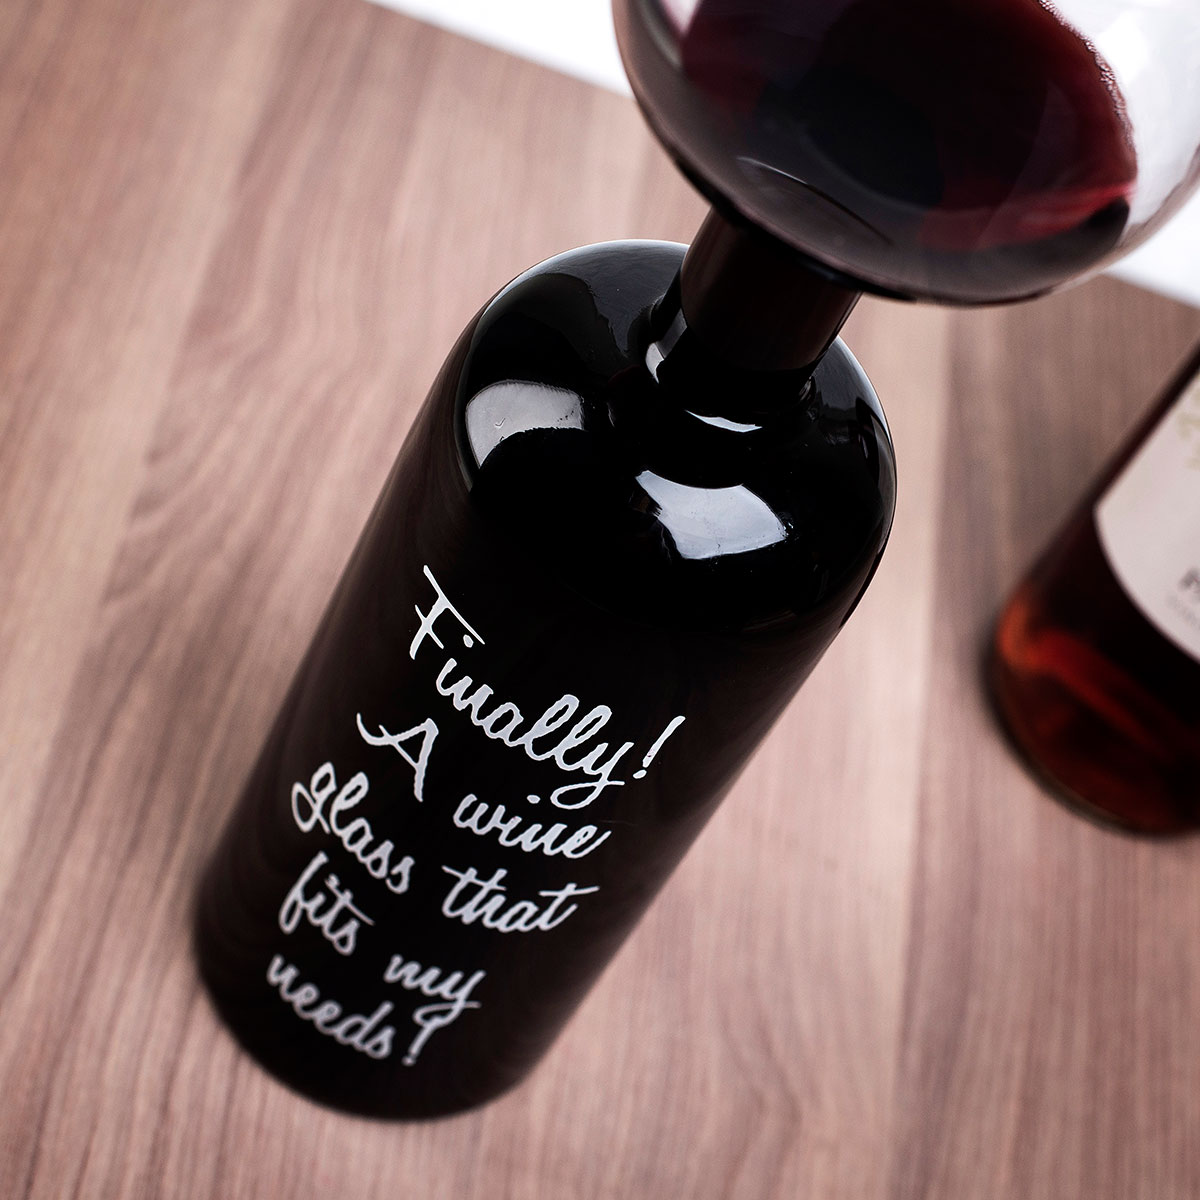 Wine Bottle Glass - Finally A Wine Glass That Fits My Needs